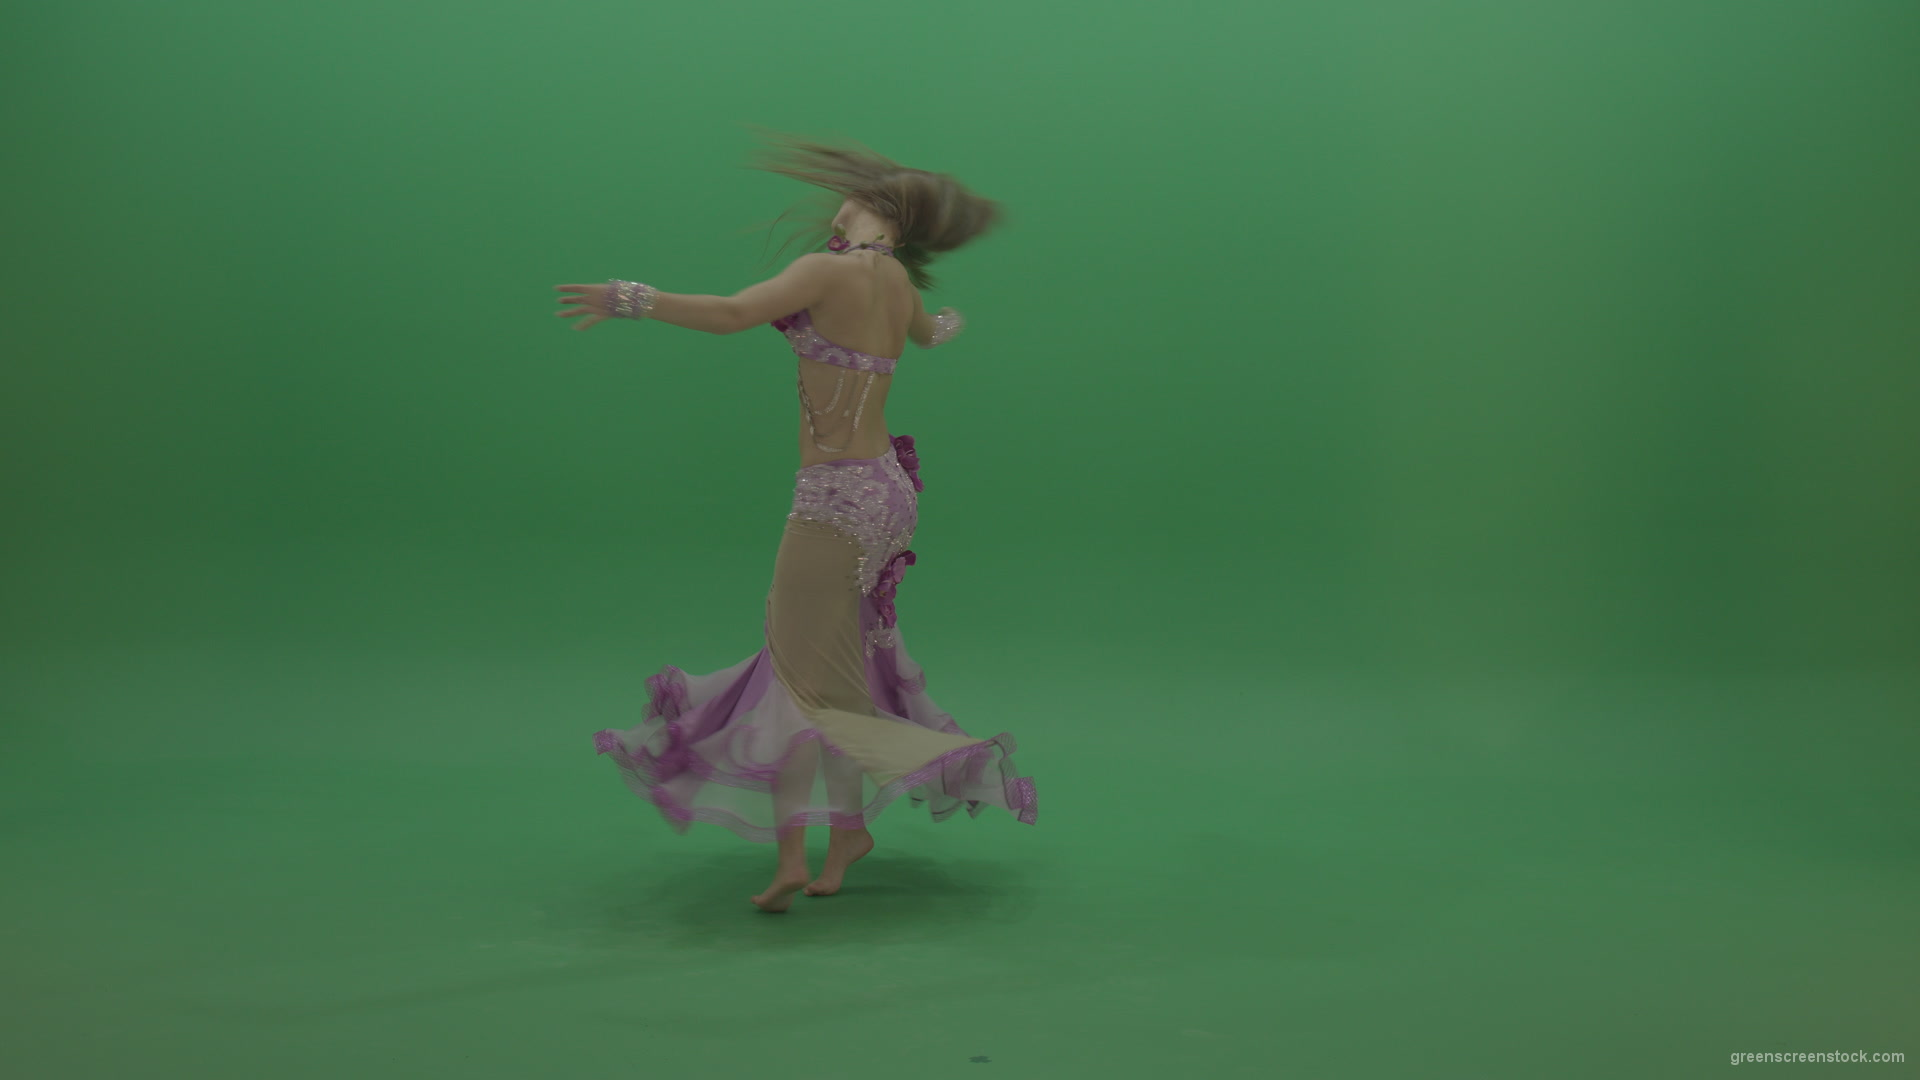 Sightly-belly-dancer-in-pink-wear-display-amazing-dance-moves-over-chromakey-background_004 Green Screen Stock